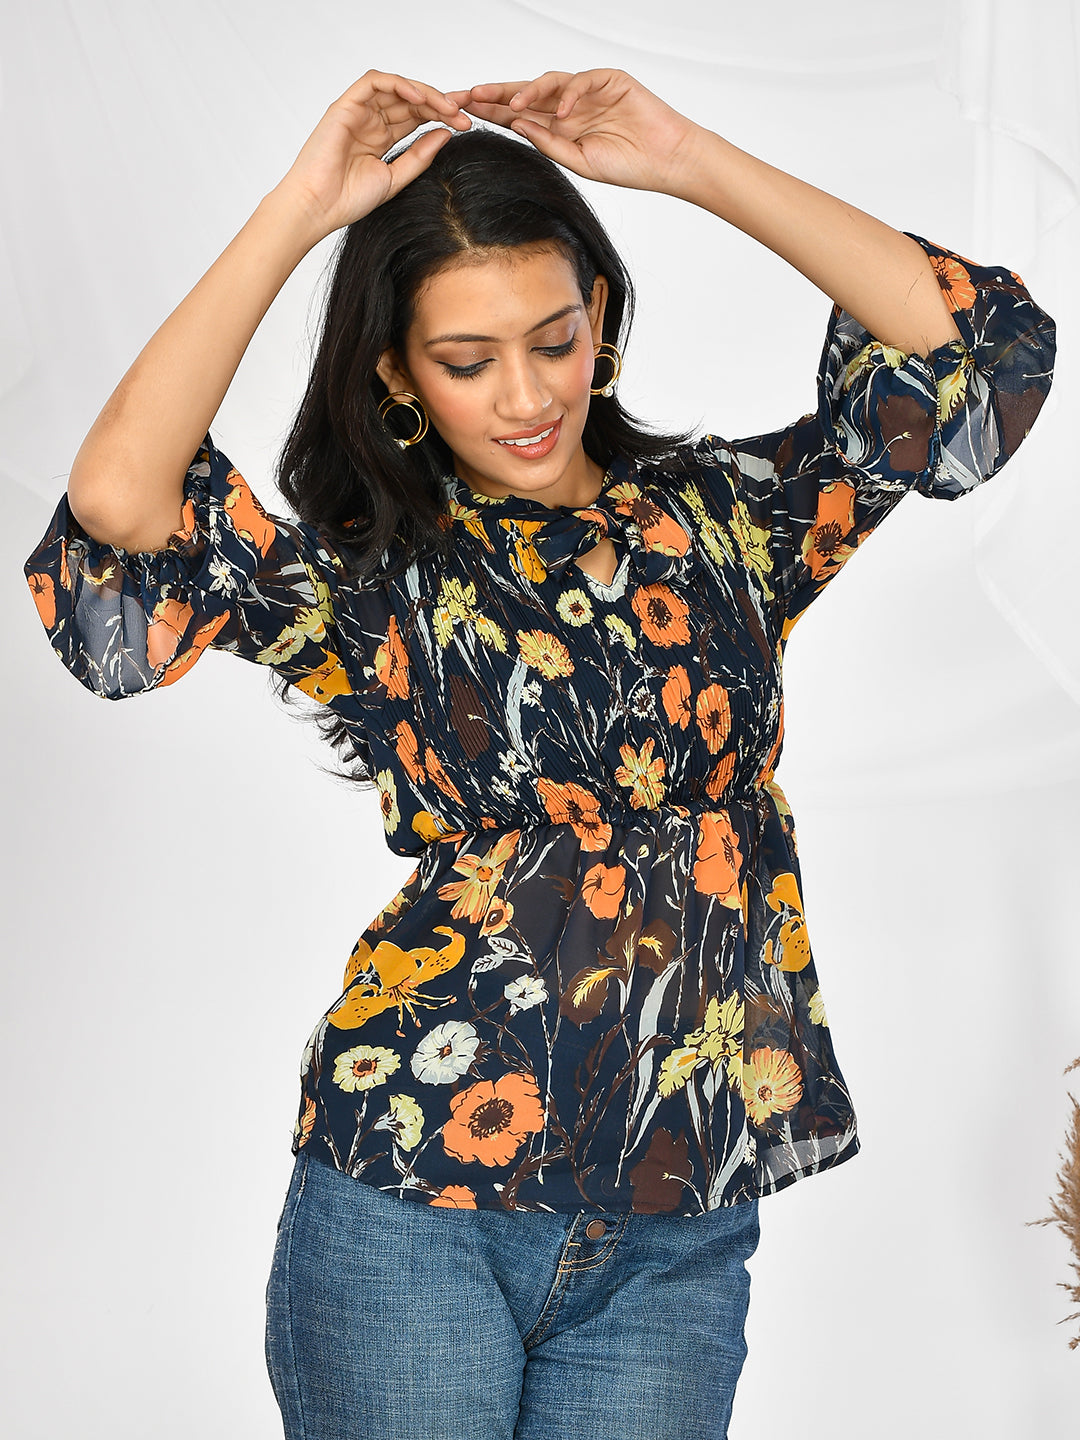 Expertly crafted with a delicate chiffon fabric, these high neck tops are adorned with a beautiful floral print. Perfect for girls and women, they offer a sophisticated and fashion-forward look. Elevate your wardrobe with airy and feminine tops that exude elegance and style.